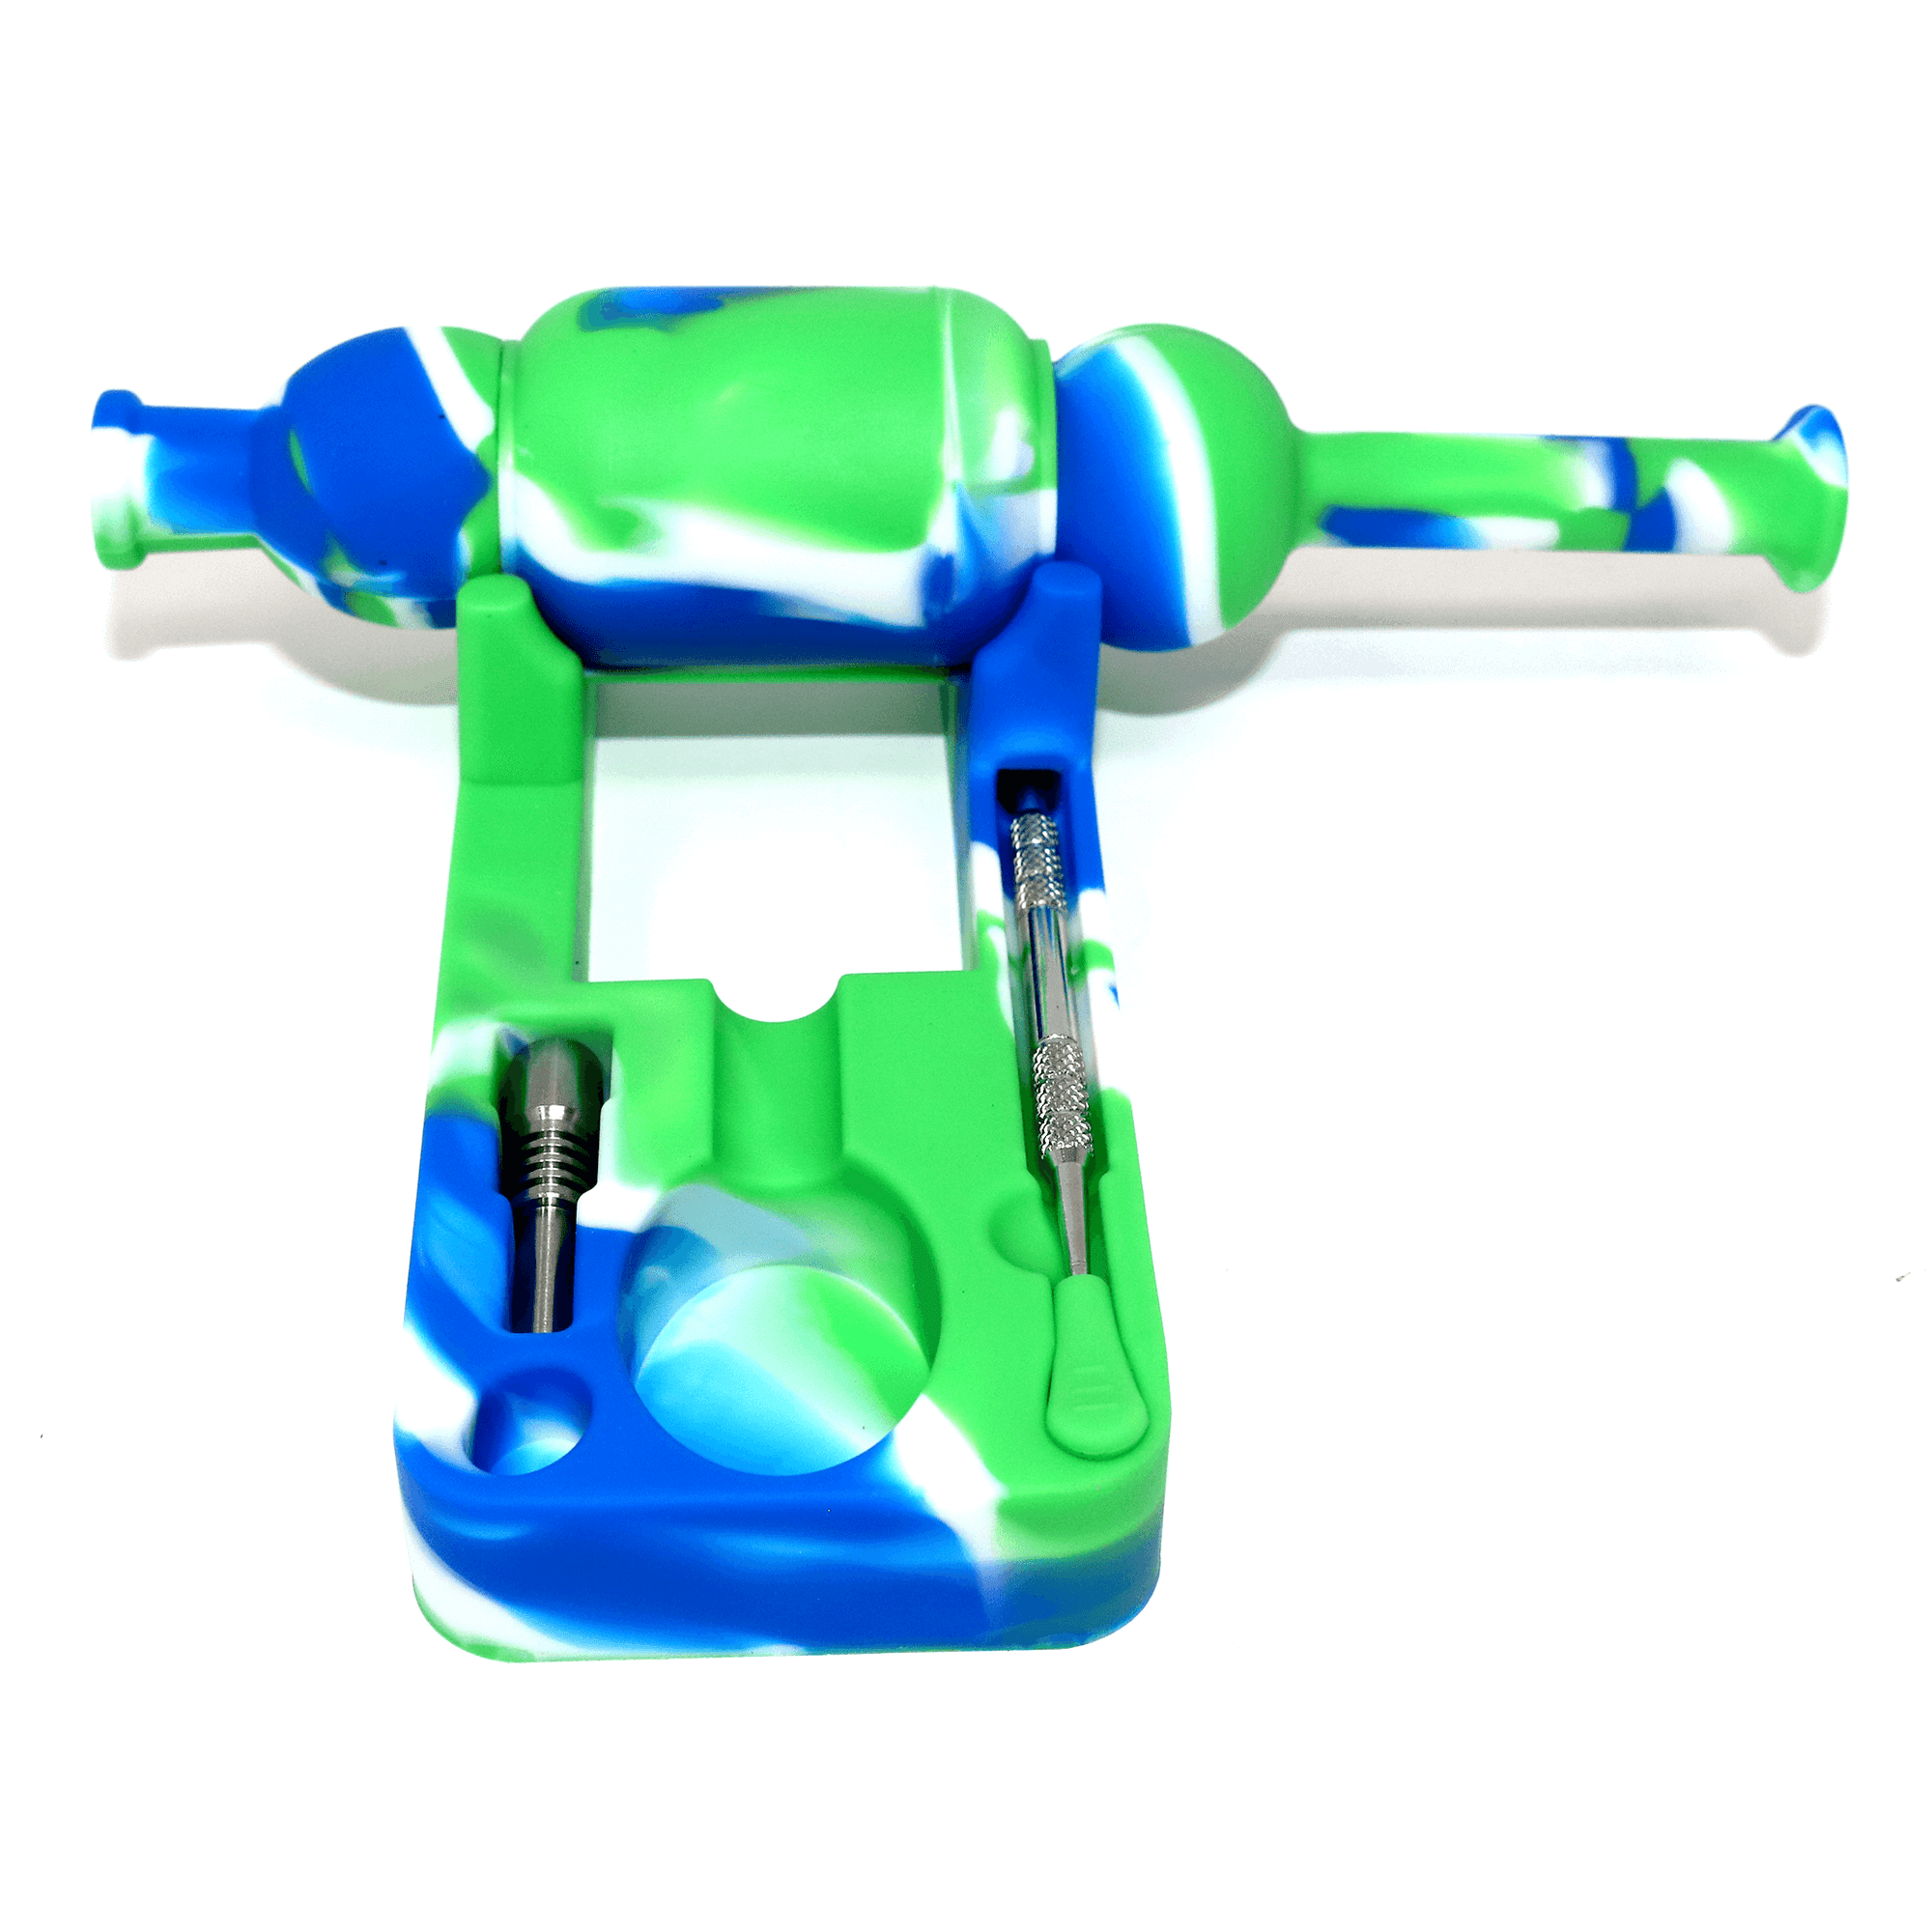 Silicone Nectar Collector | Green, White, & Blue Top Down Complete View | Dabbing Warehouse